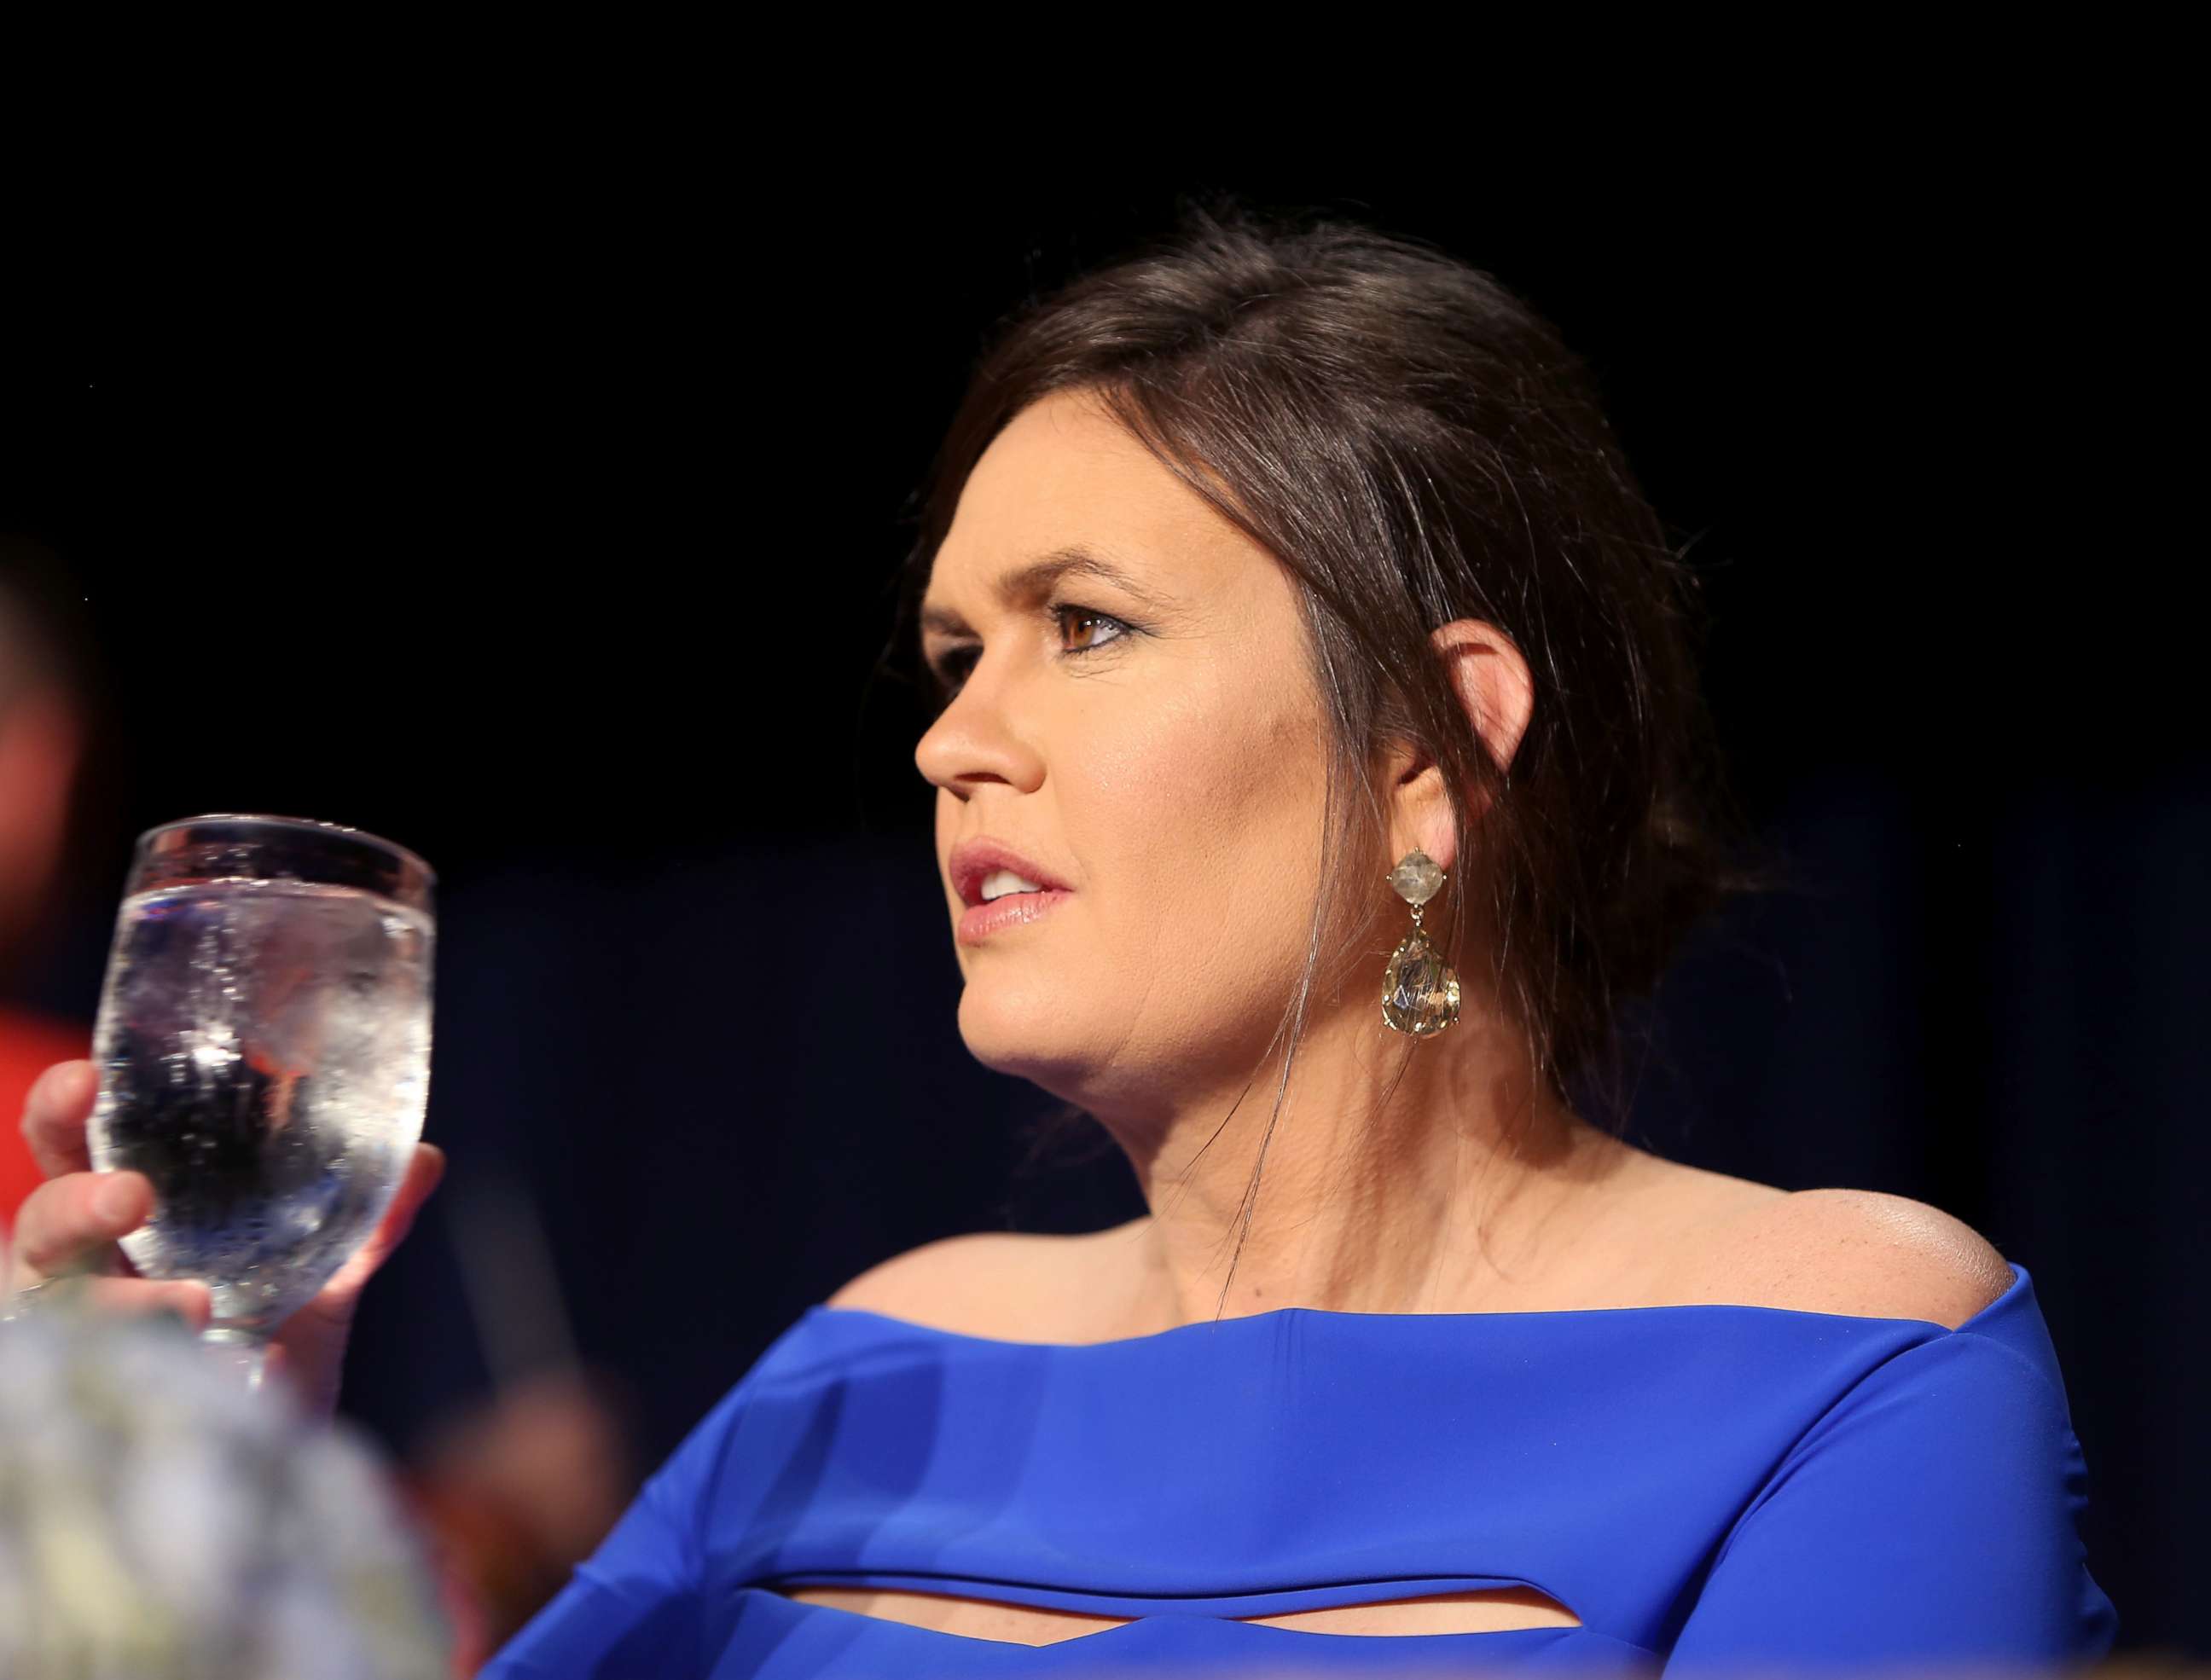 PHOTO: Sarah Huckabee Sanders attends the 2018 White House Correspondents' Dinner at the Washington Hilton on April 28, 2018, in Washington, D.C.  